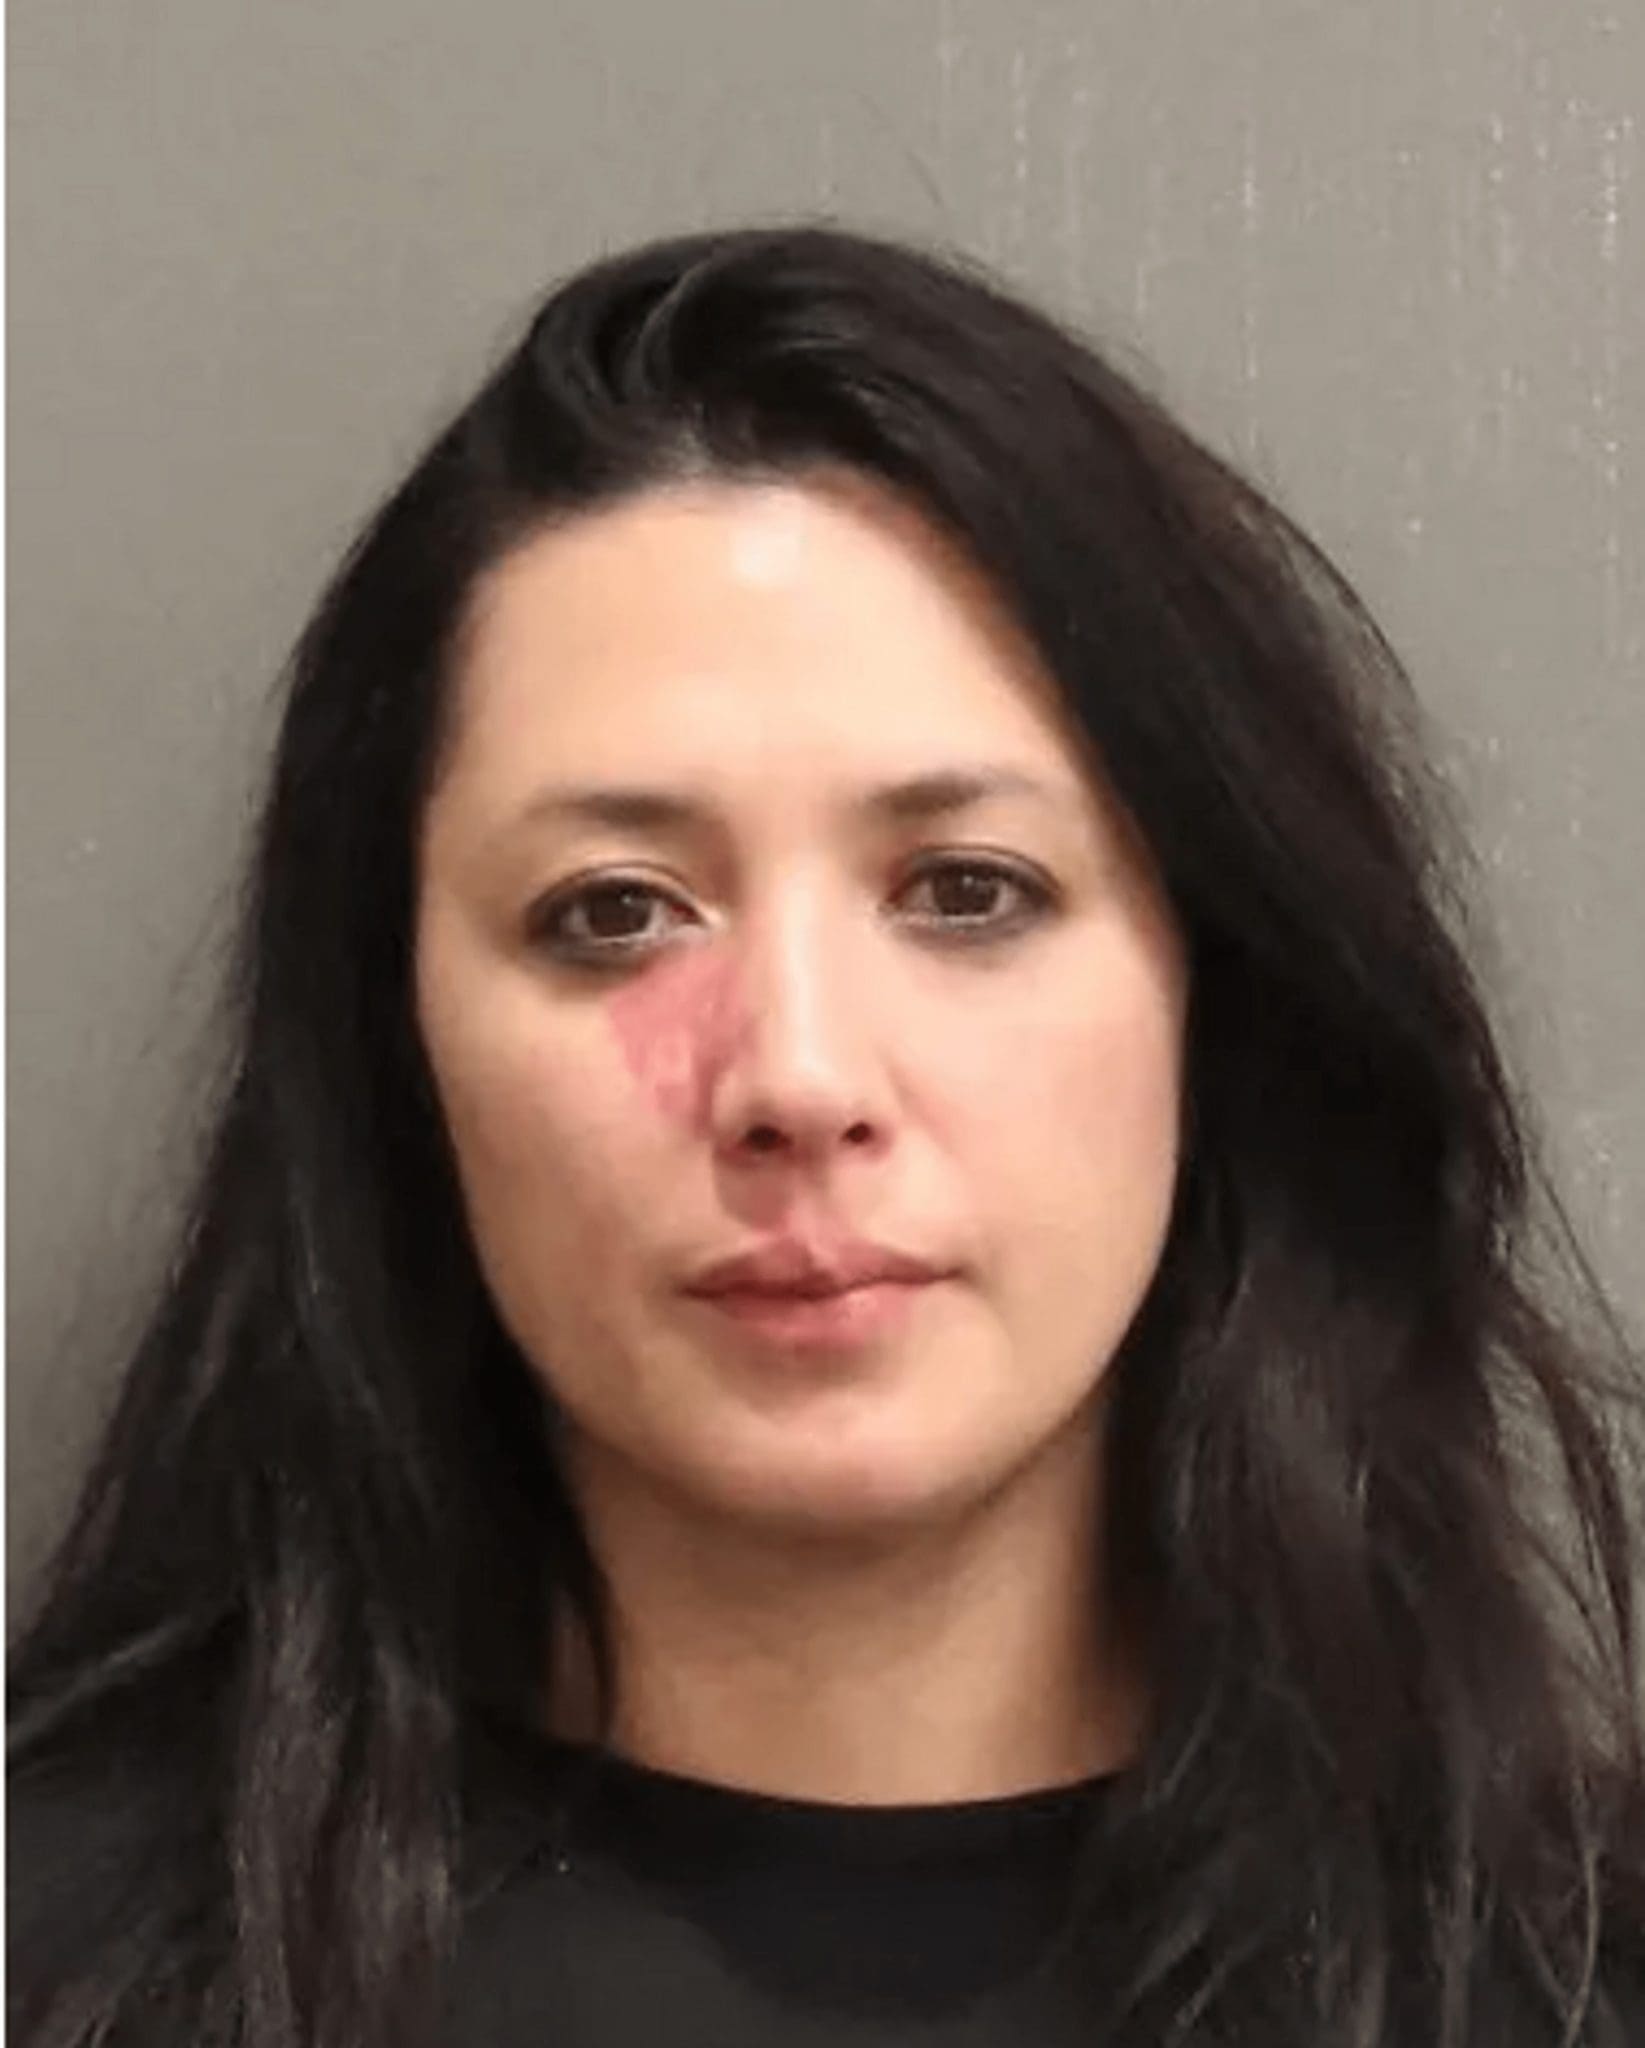 Michelle Branch Was Detained For Domestic Violence